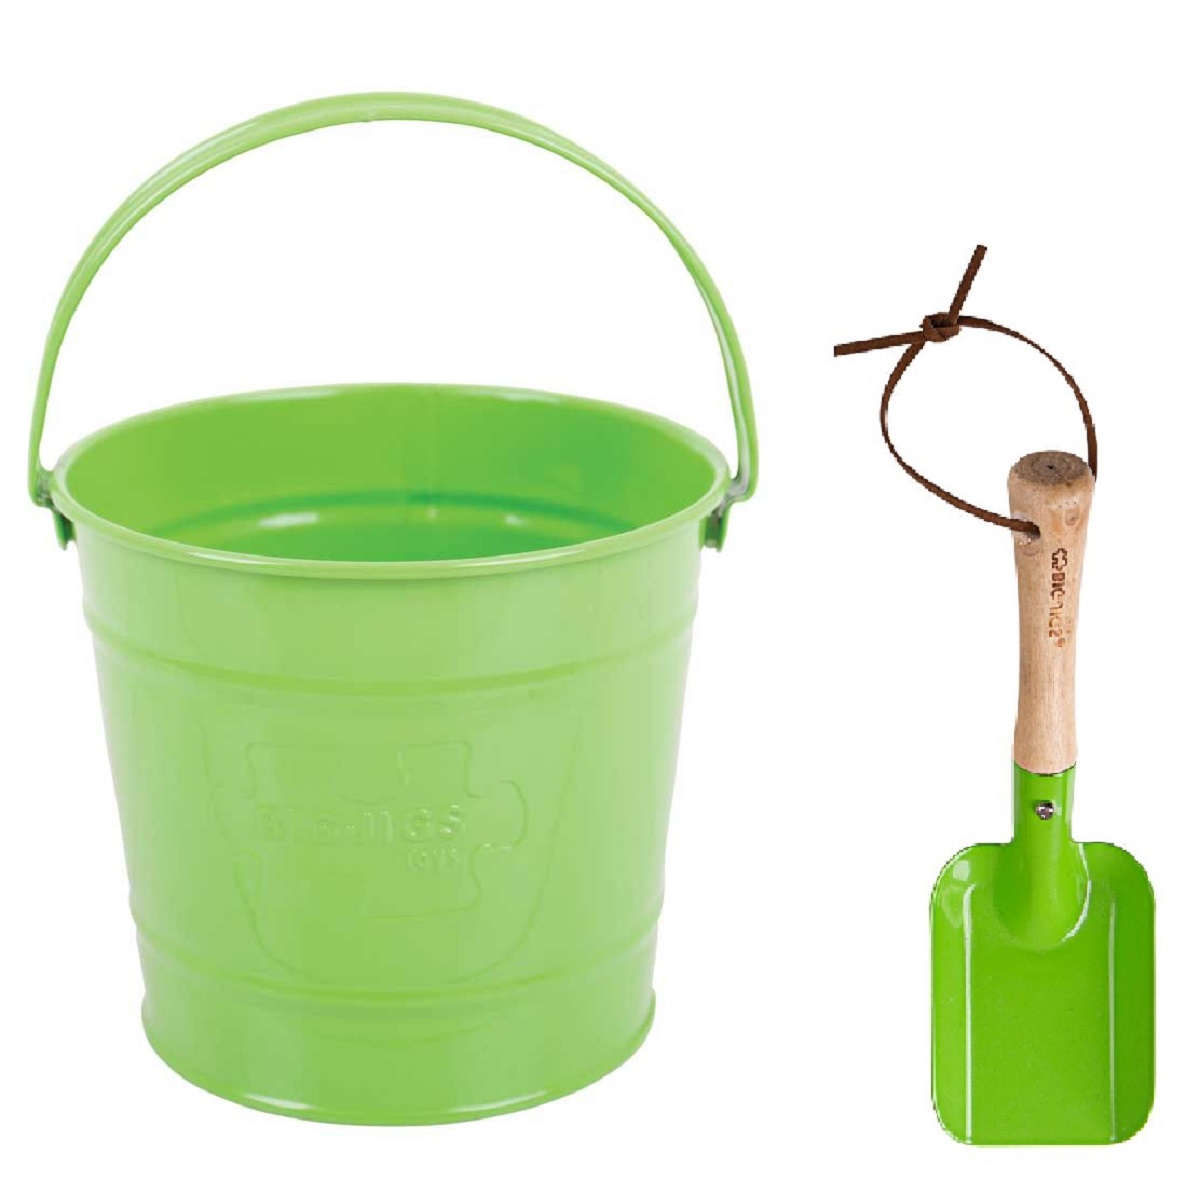 Childrens Green Bucket and Spade Kit, Gardening Tools for Kids